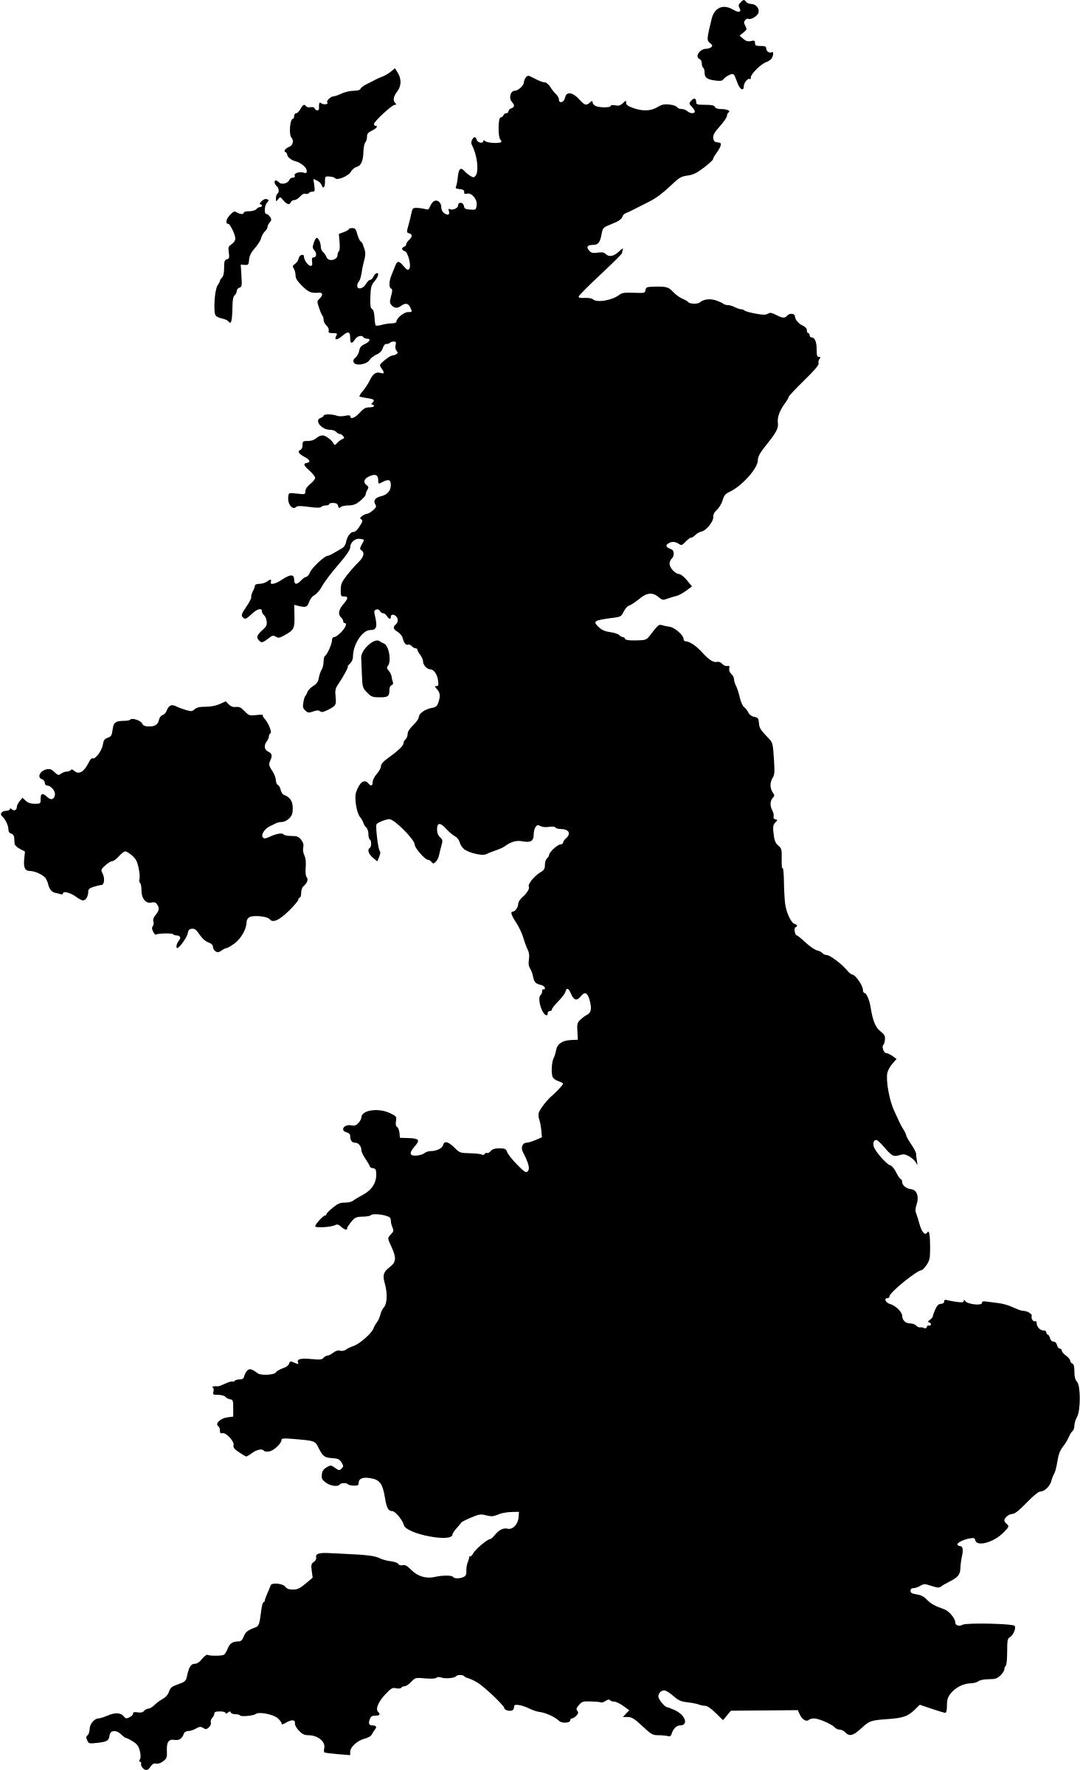 UK Silhouette png transparent